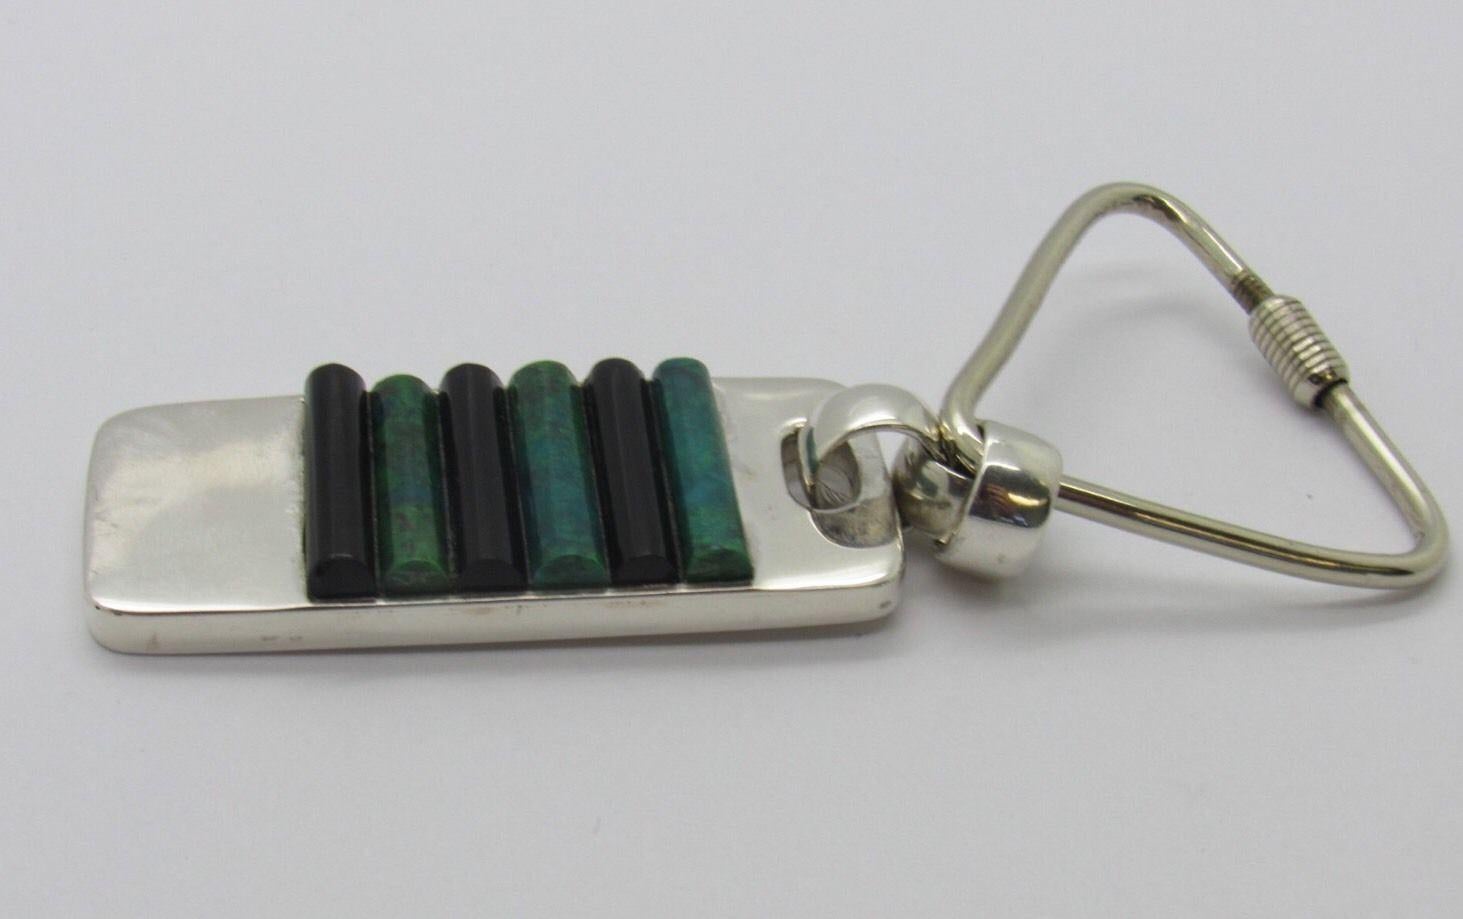 Taxco Mexico J. Gomes sterling silver tag key chain with an inlay of 3 onyx and 3 green turquoise stones. Marked: STERLING, 925, J. GOMES, TC-38, MEXICO. Measures: 3 1/2